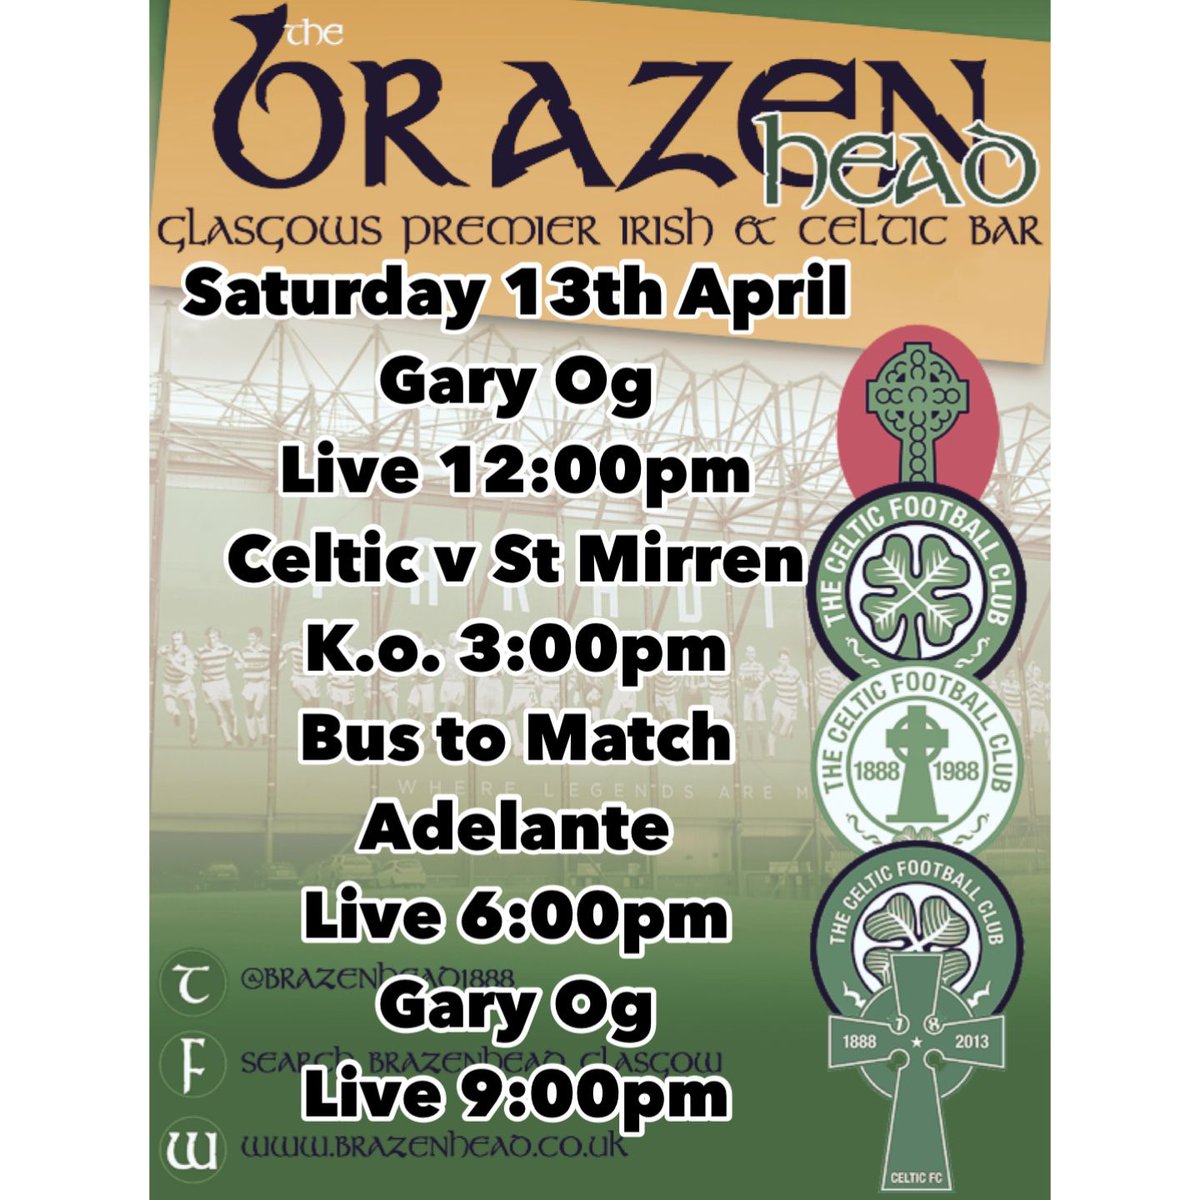 Great night with the Irvine CSC, back in Glasgow today. See you in the @Brazenhead1888